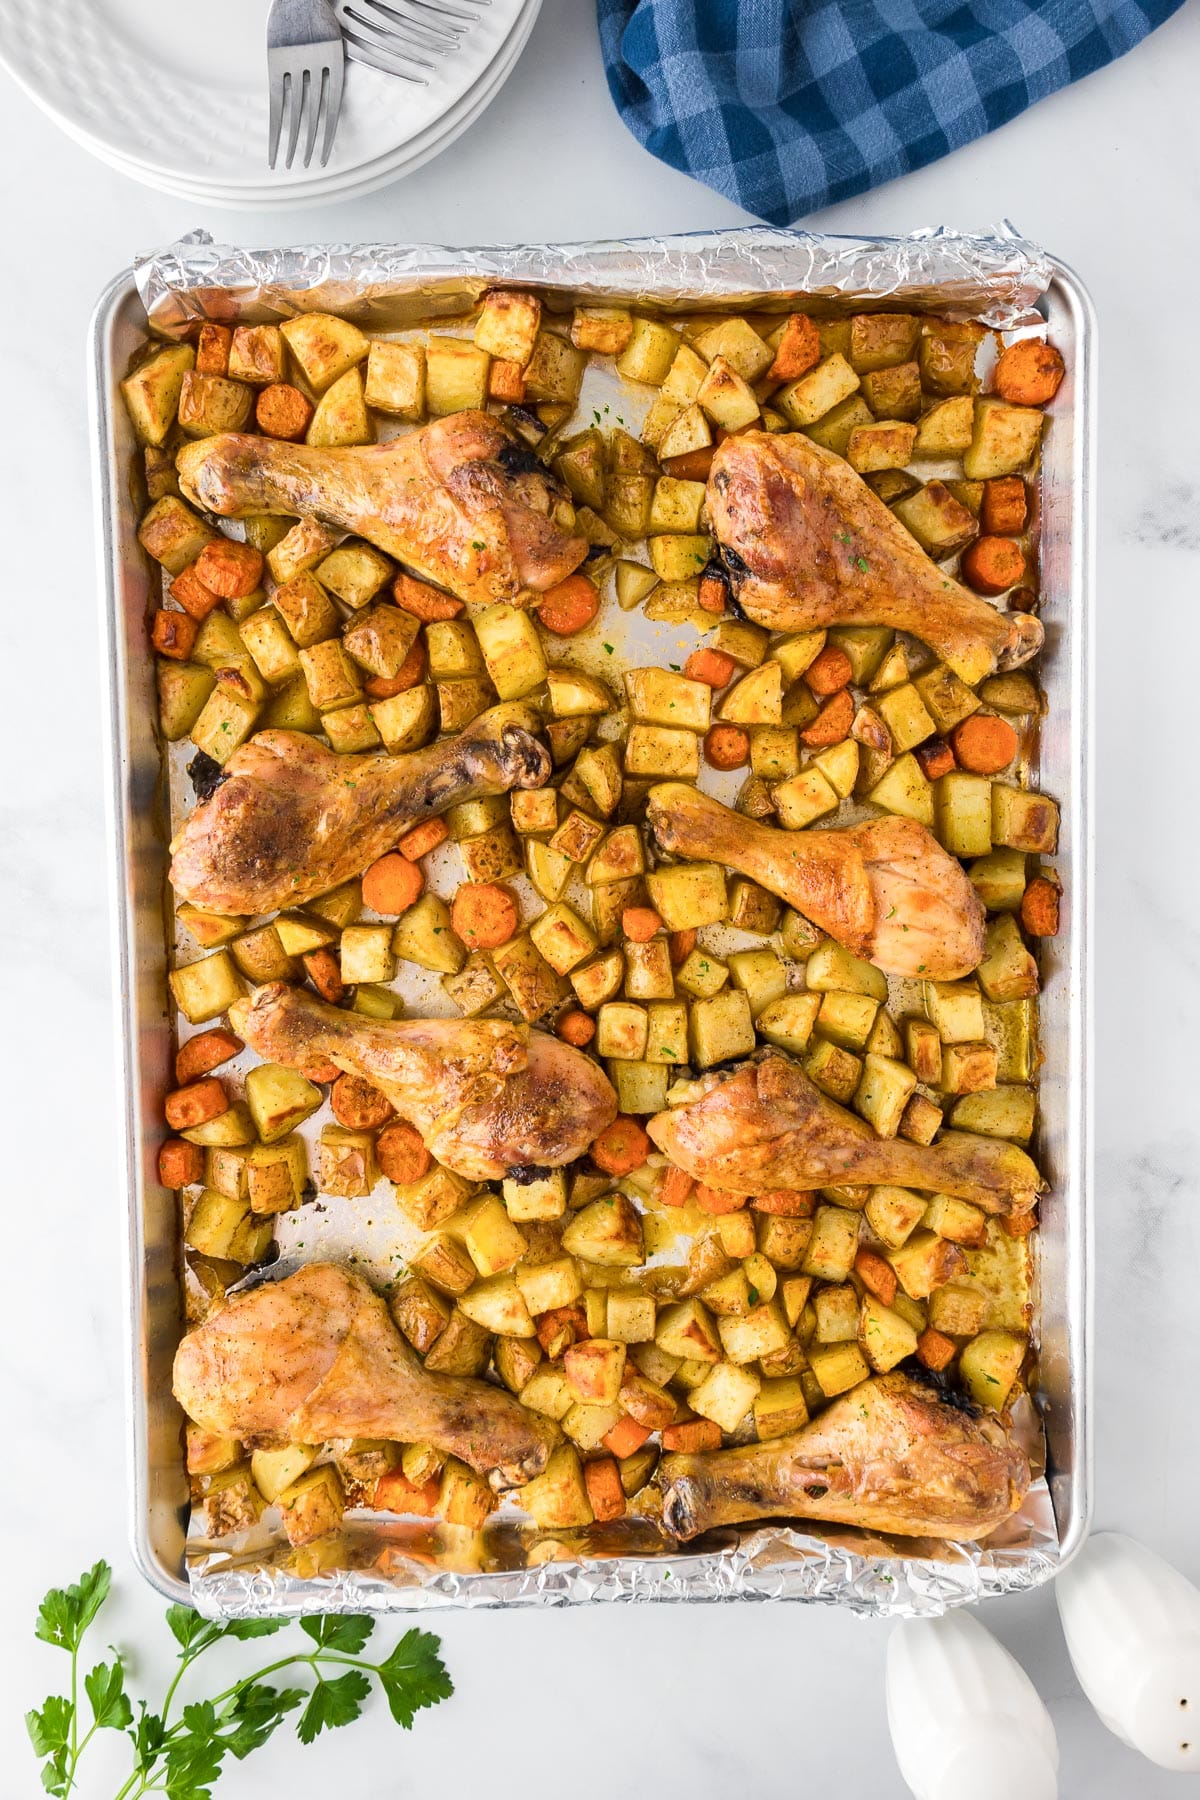 Golden brown roasted chicken legs with diced potatoes and carrots on a baking sheet.